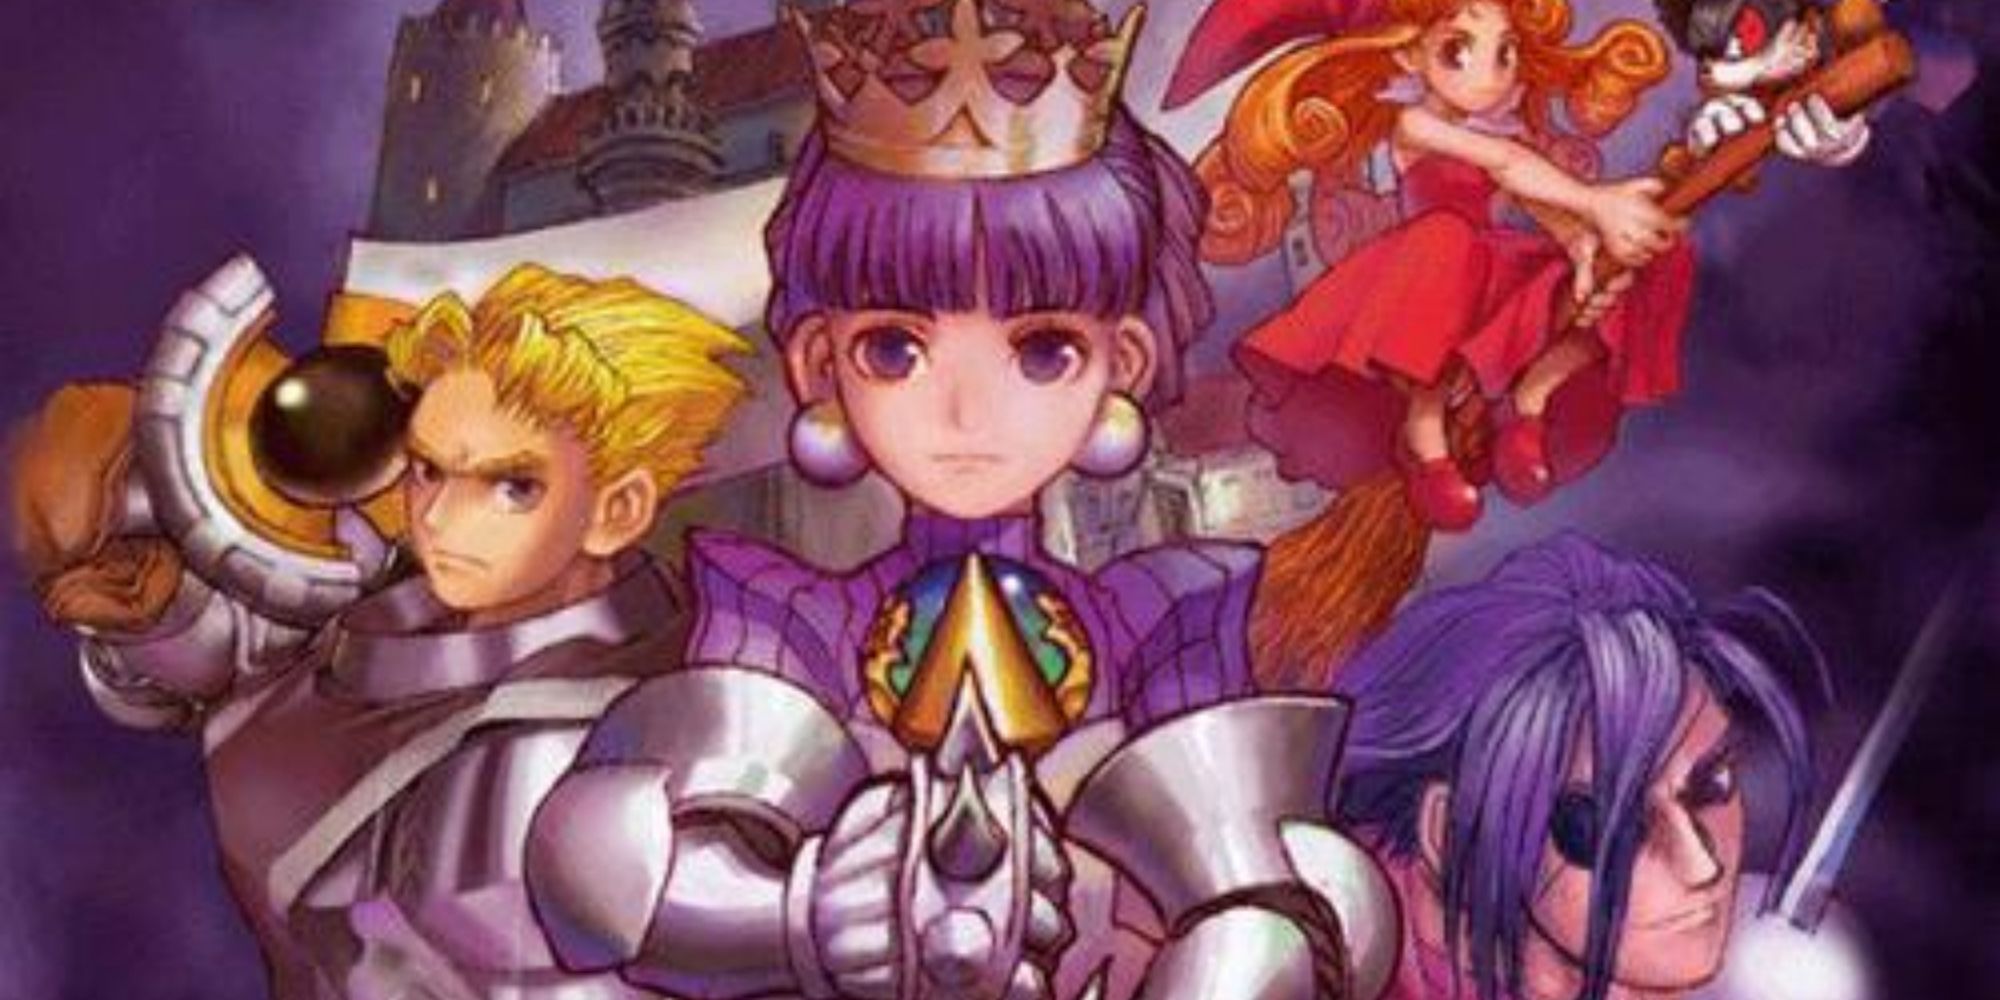 Promo art featuring characters in Princess Crown